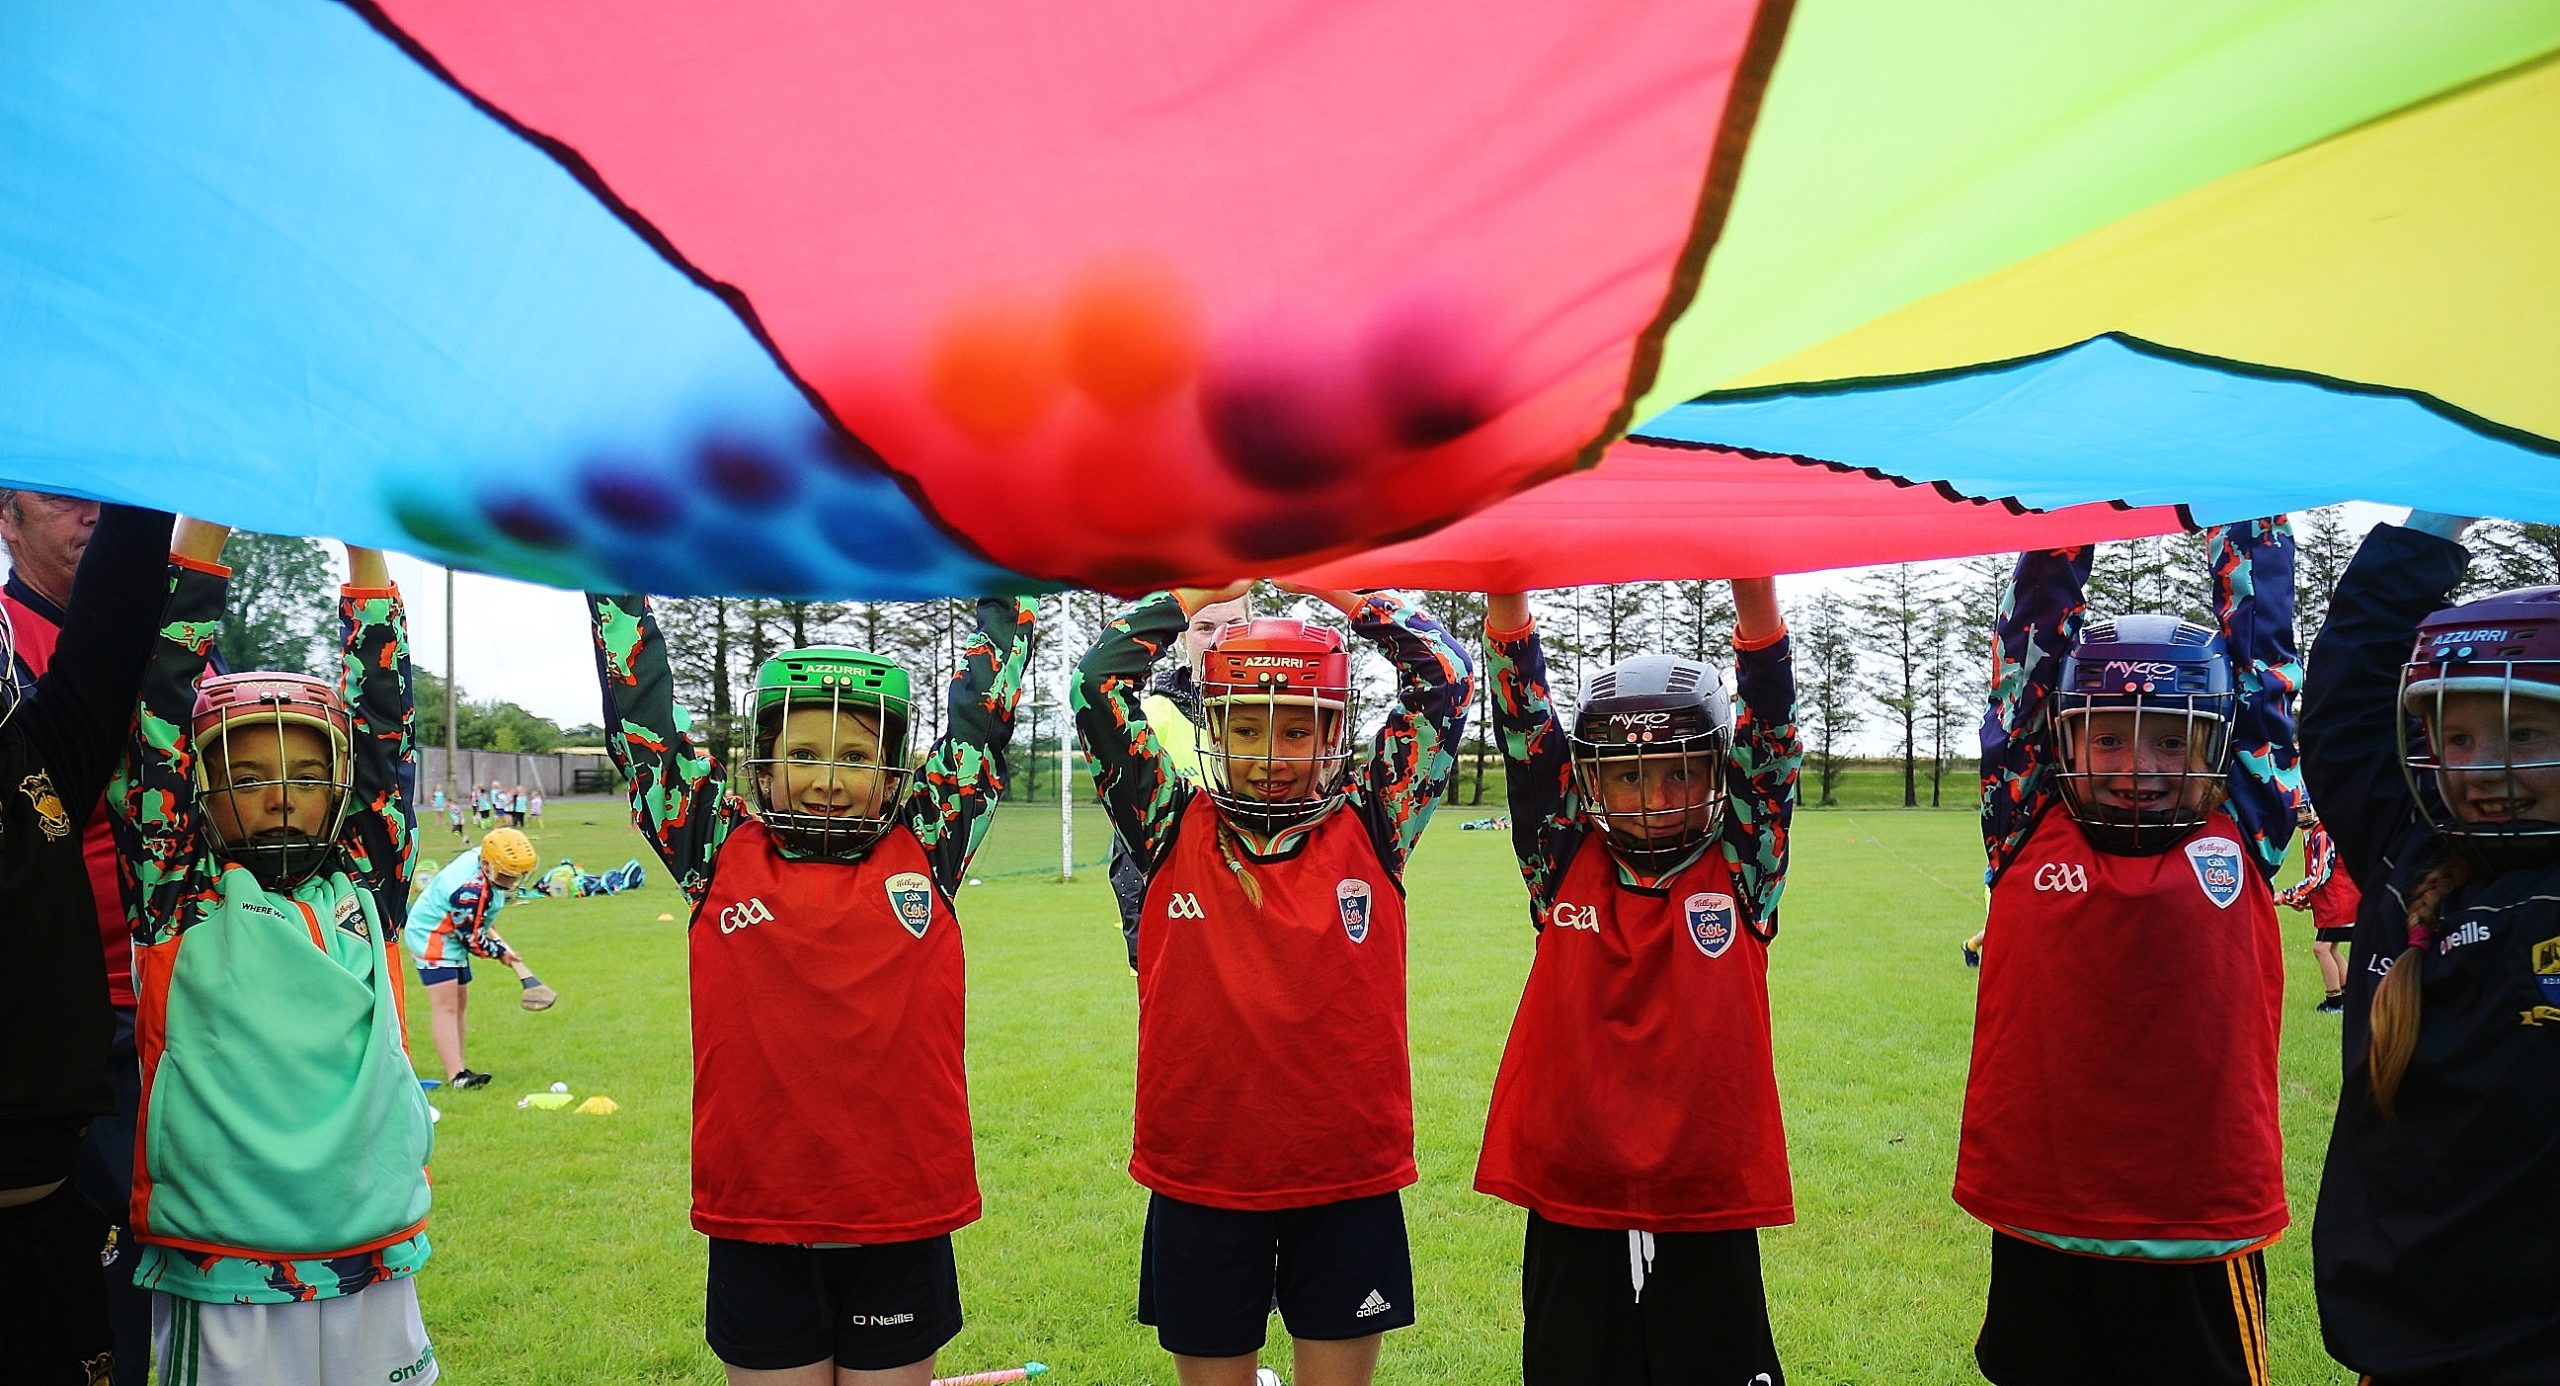 The Summer Officially Started this week with week one the 2021 Kellogg’s Cúl Camp. Check out the GAA Fun packed week here from Adamstown HWH Bunclody  Horeswood  Naomh Eanna  Oulart  Paric Garman  Rathnure  St Martins